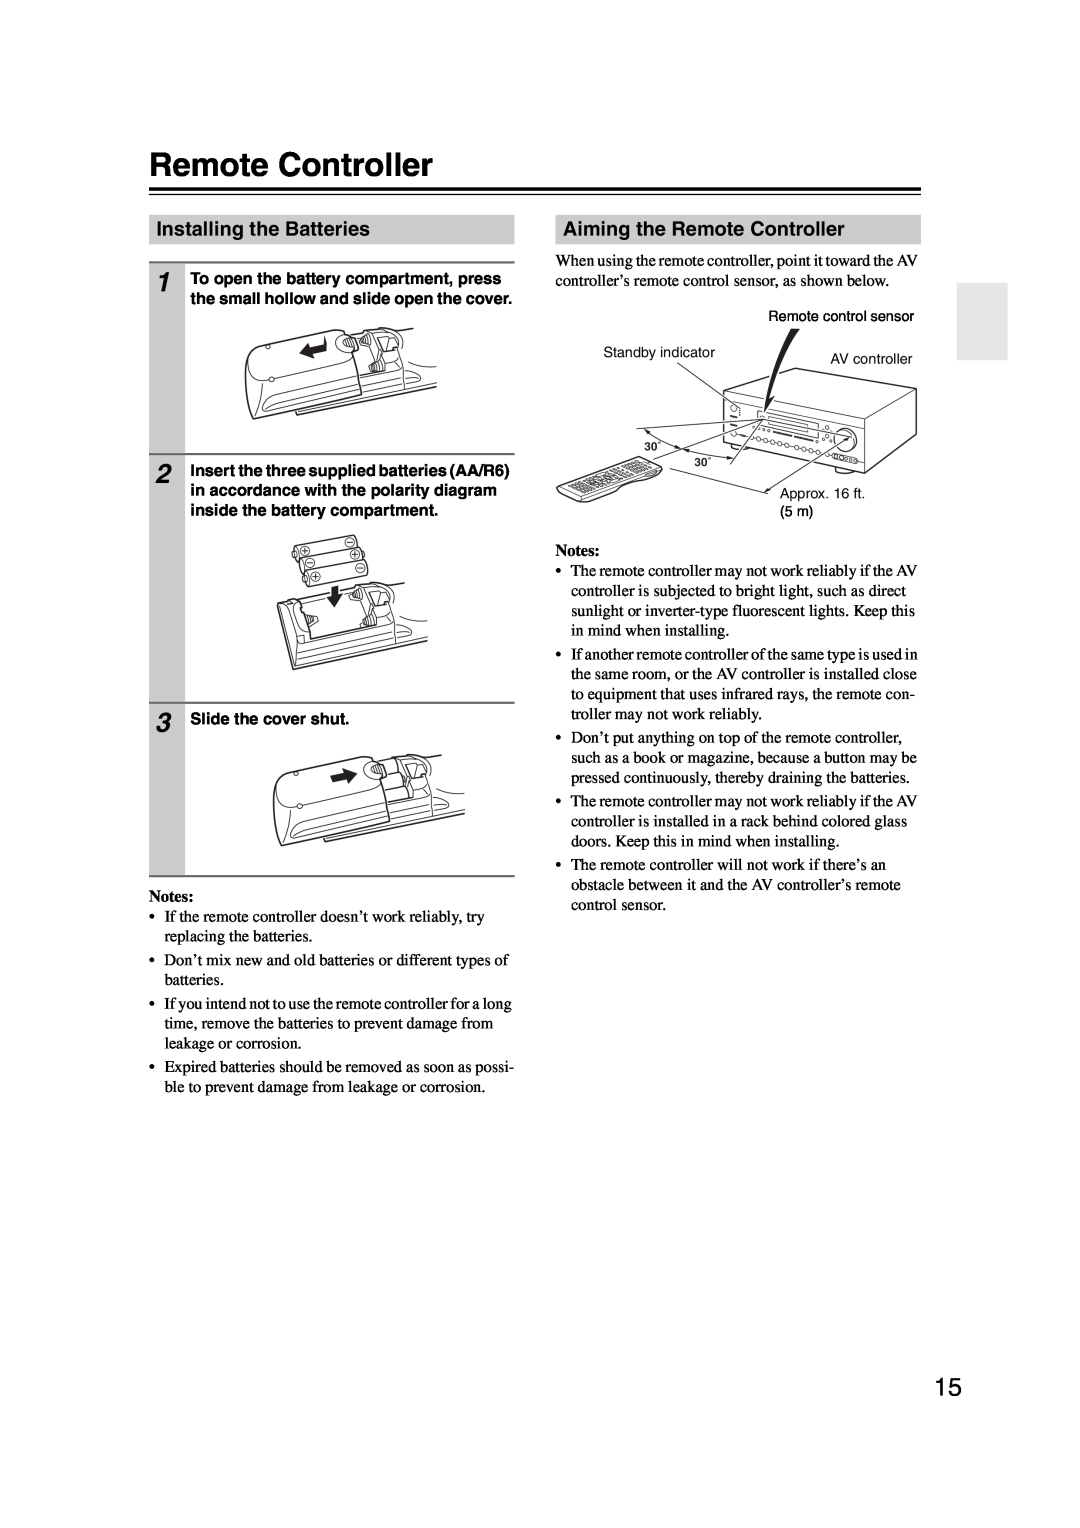 Integra DHC-9.9 instruction manual Installing the Batteries, Aiming the Remote Controller, Notes 